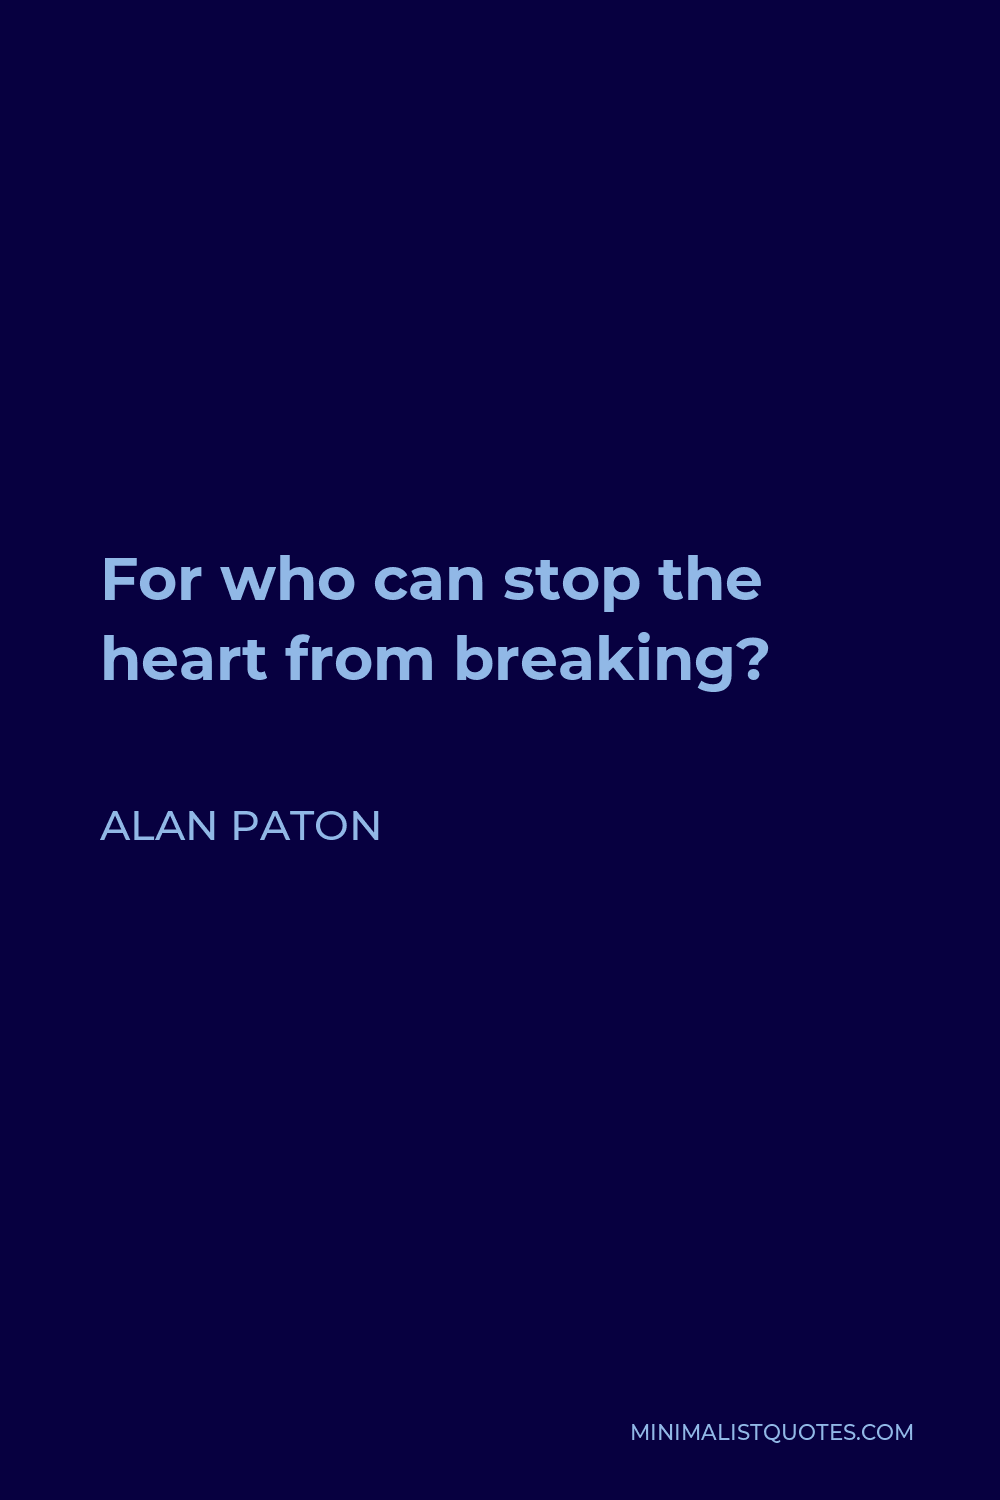 Alan Paton Quote - For who can stop the heart from breaking?